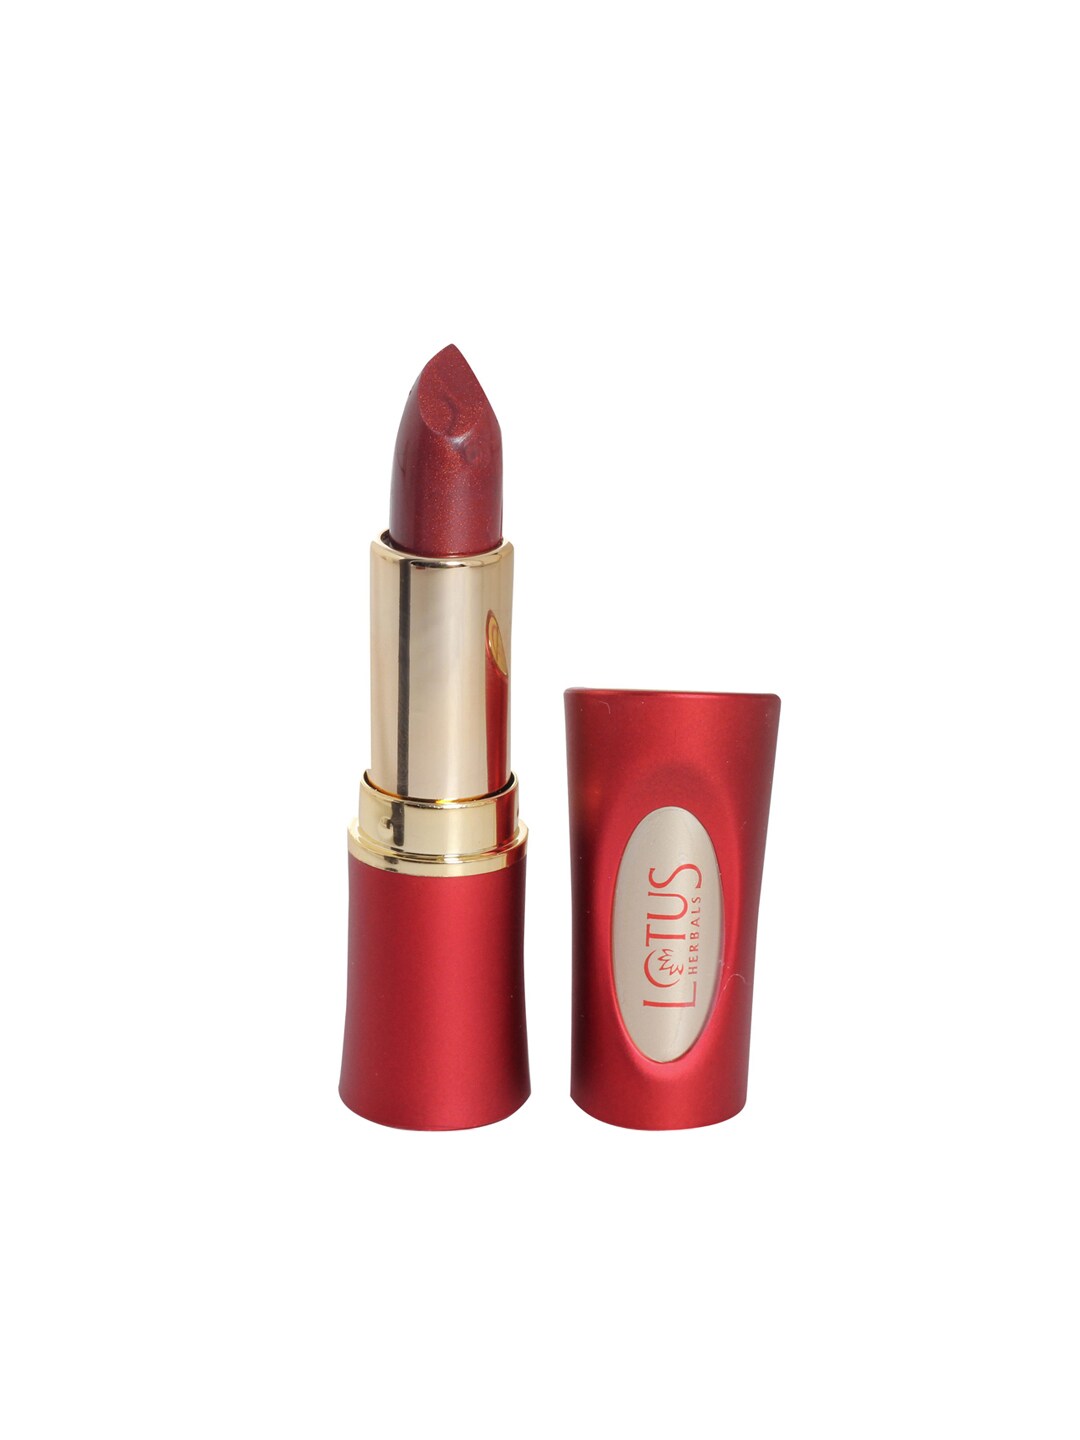 Lotus Herbals Red Rover 112 Lip Colour